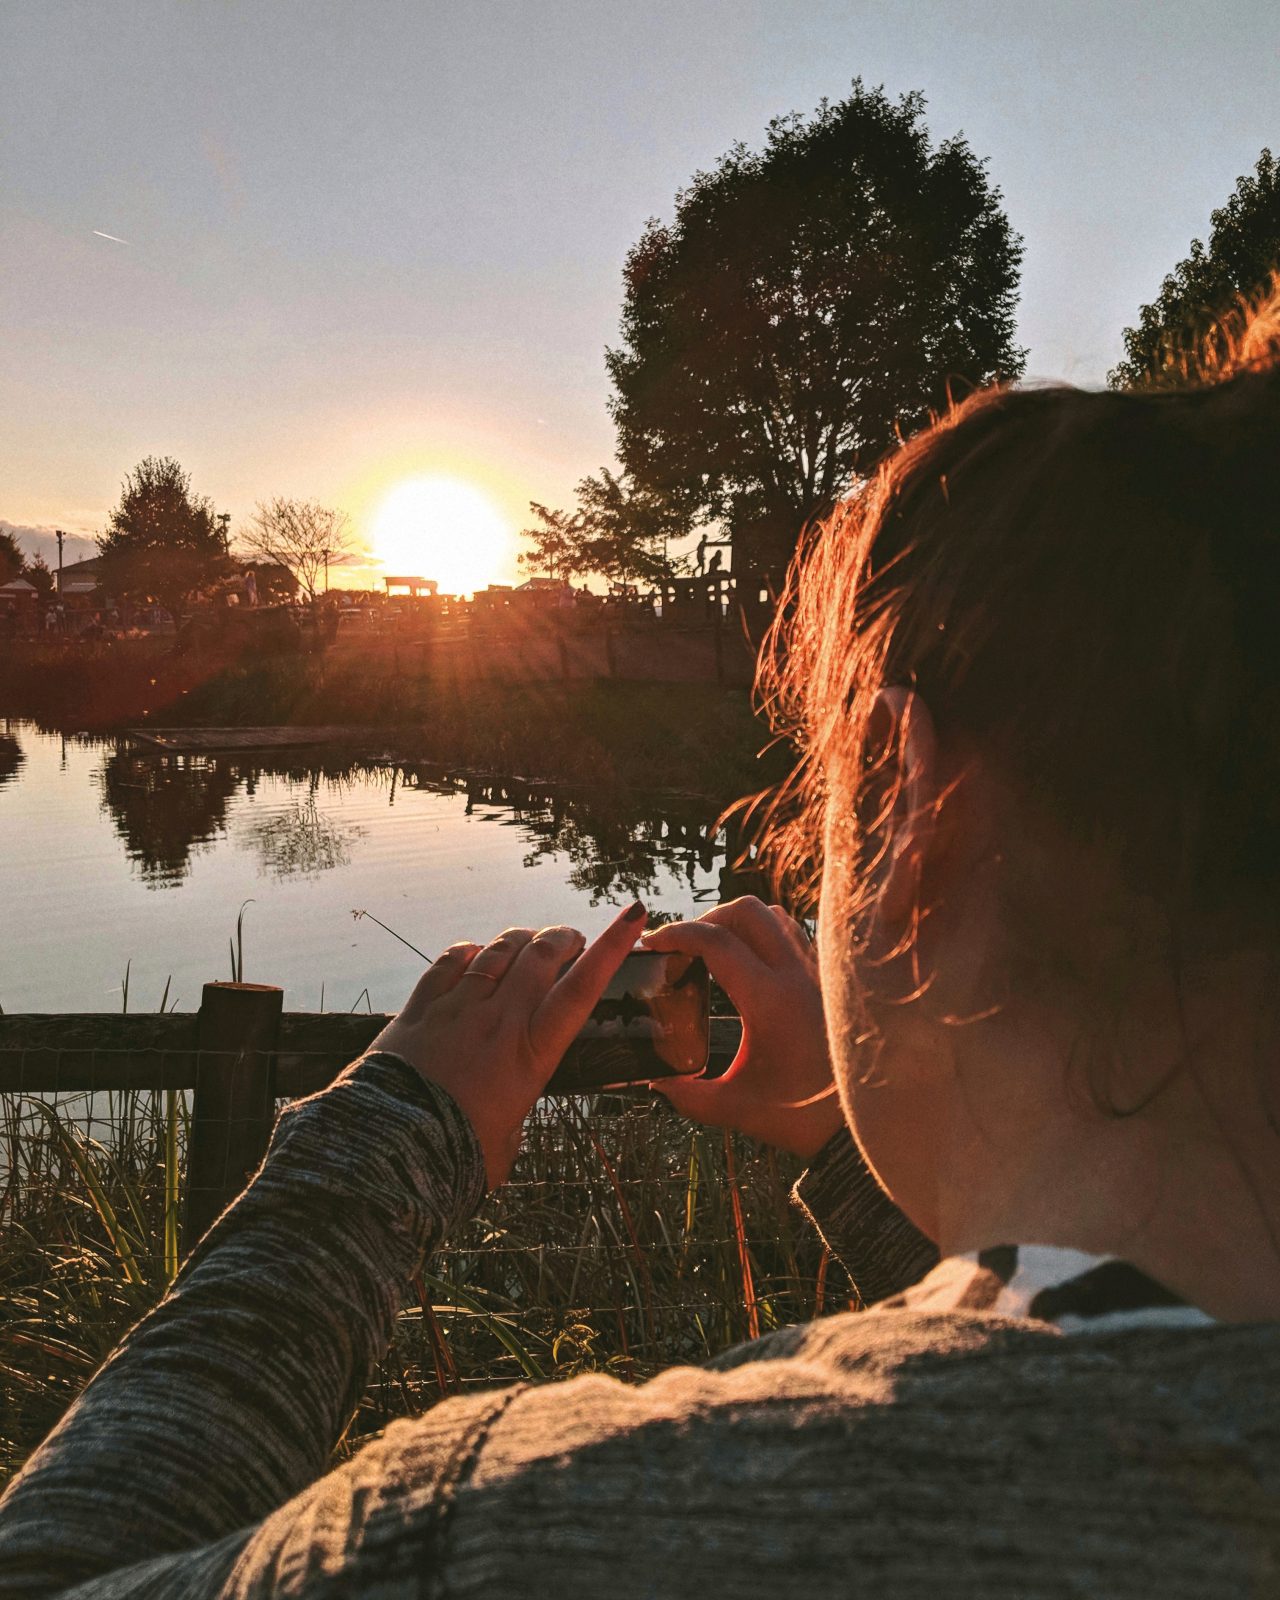 Eliza, taking a photo of a sunset over a pond.